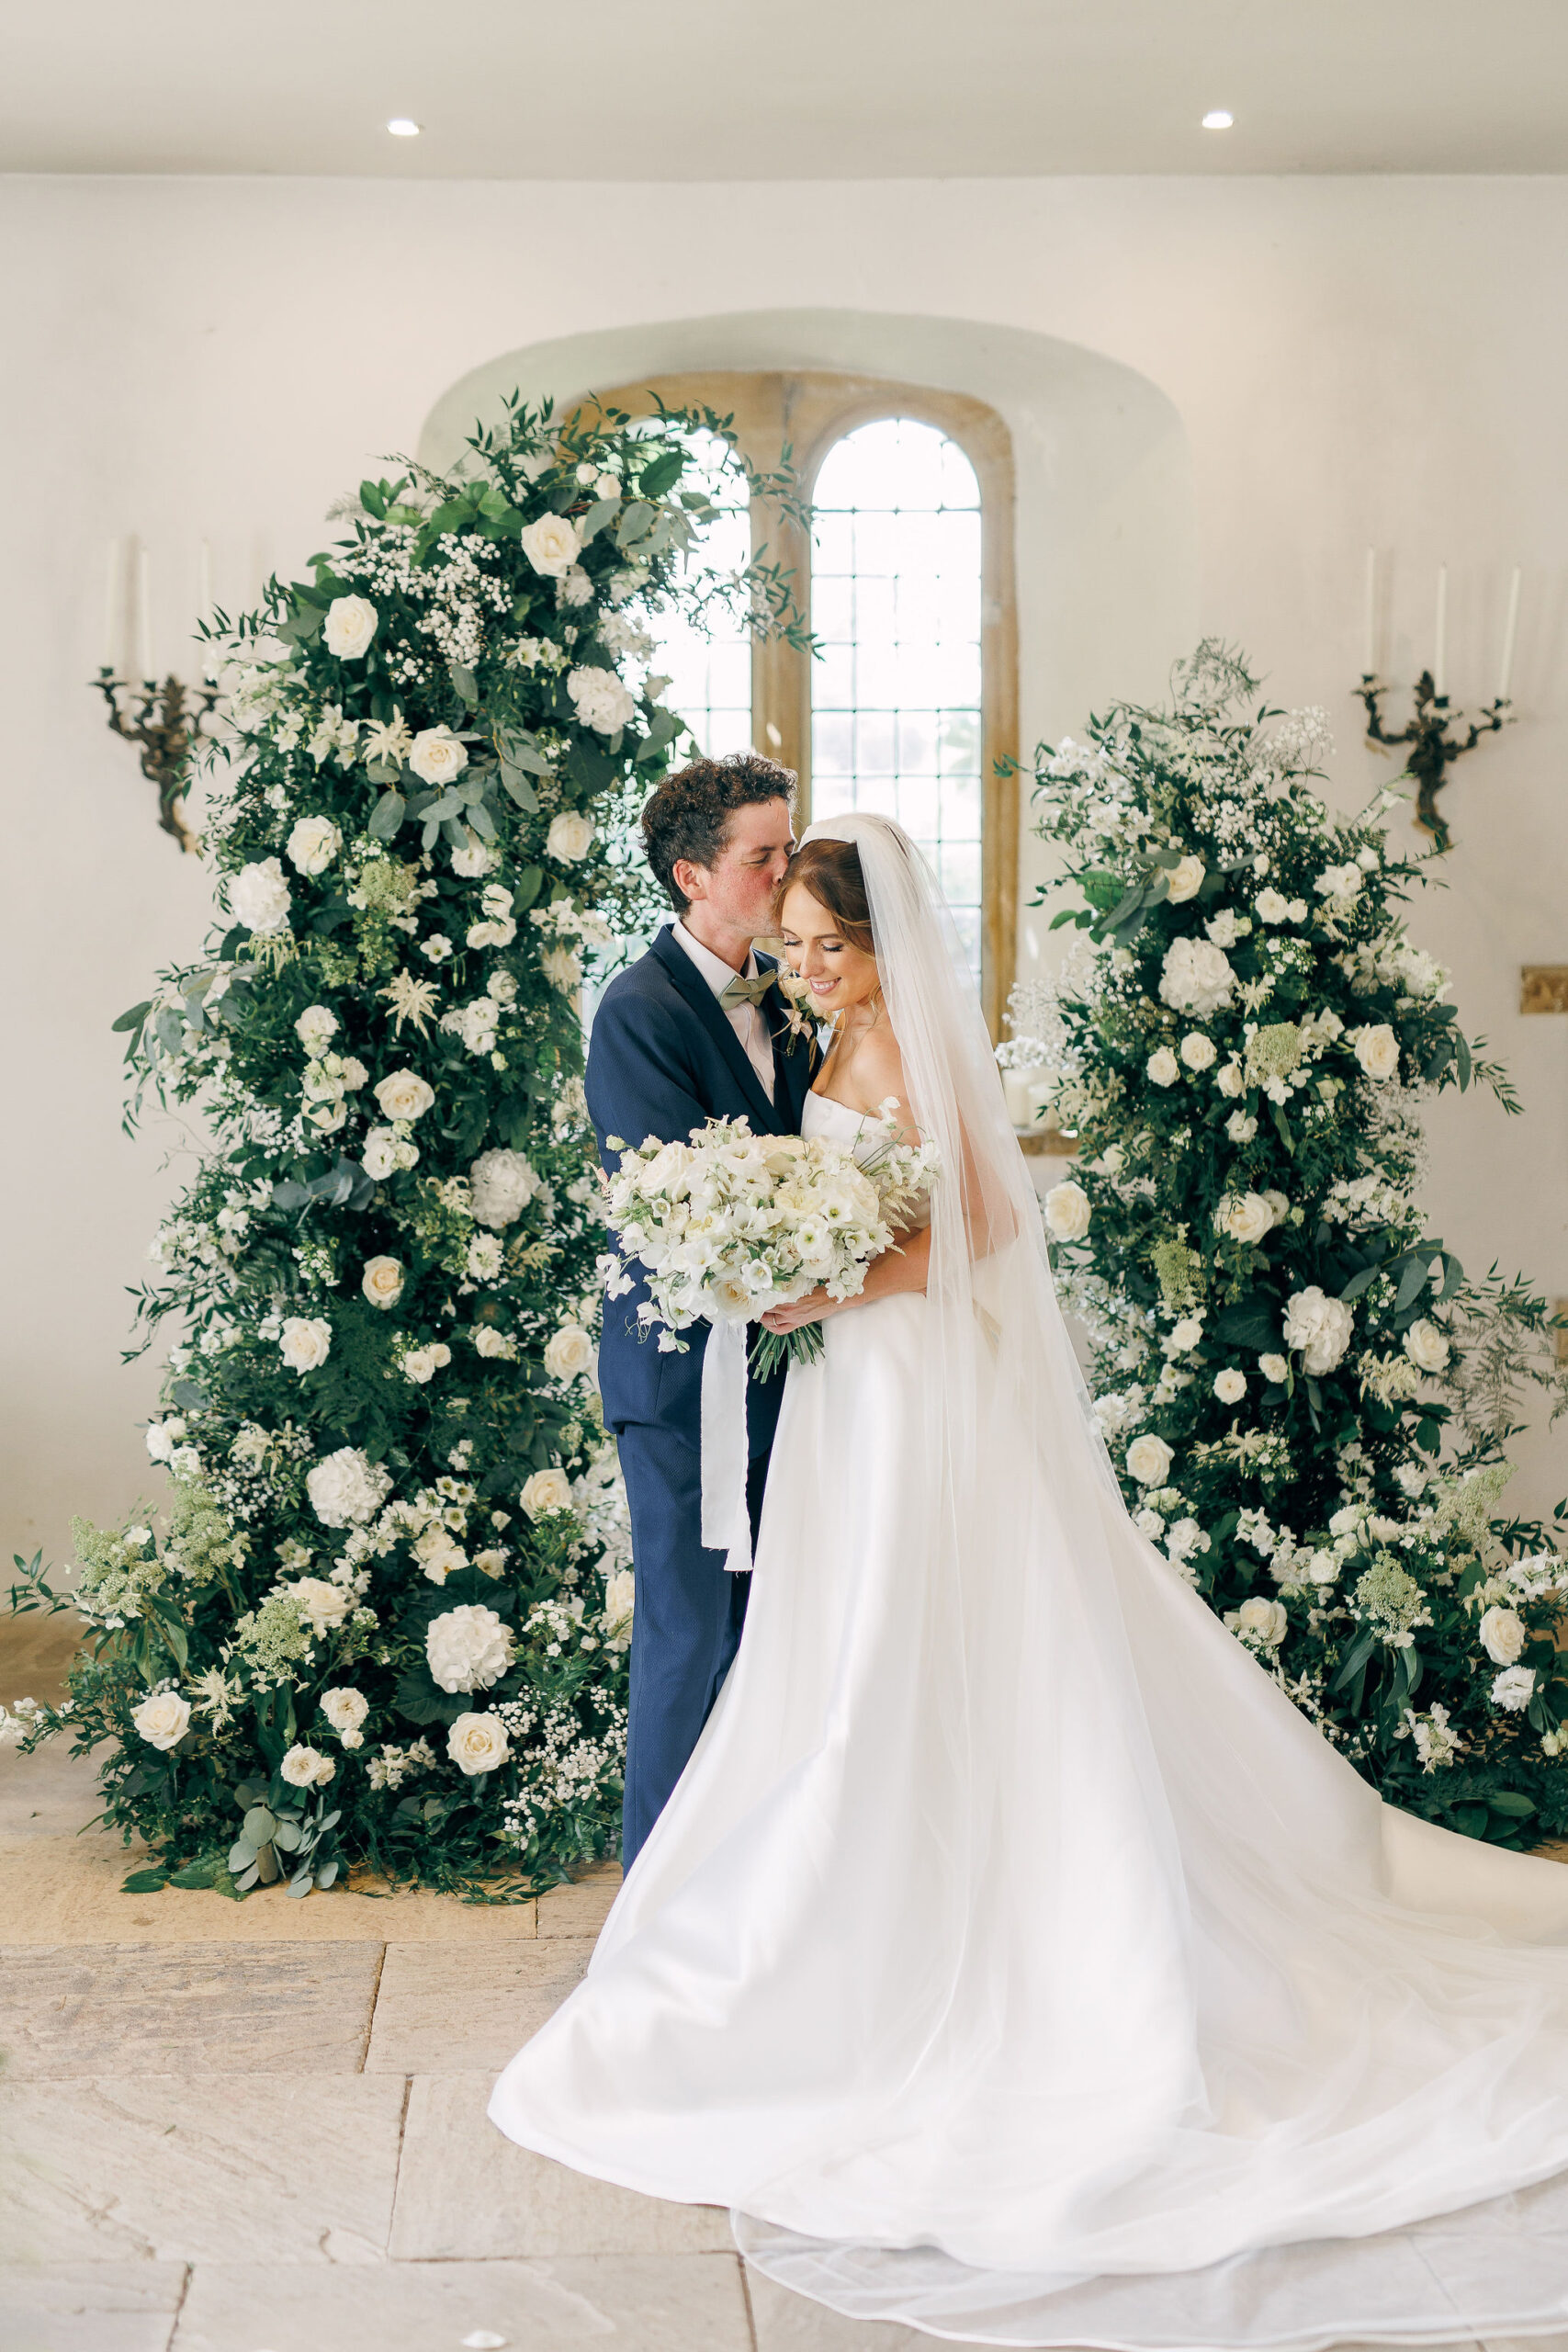 Brympton House wedding florist Flourish and Grace with White Stag Weddings Photography green and white country manor house wedding, asymmetrical open ceremony arch